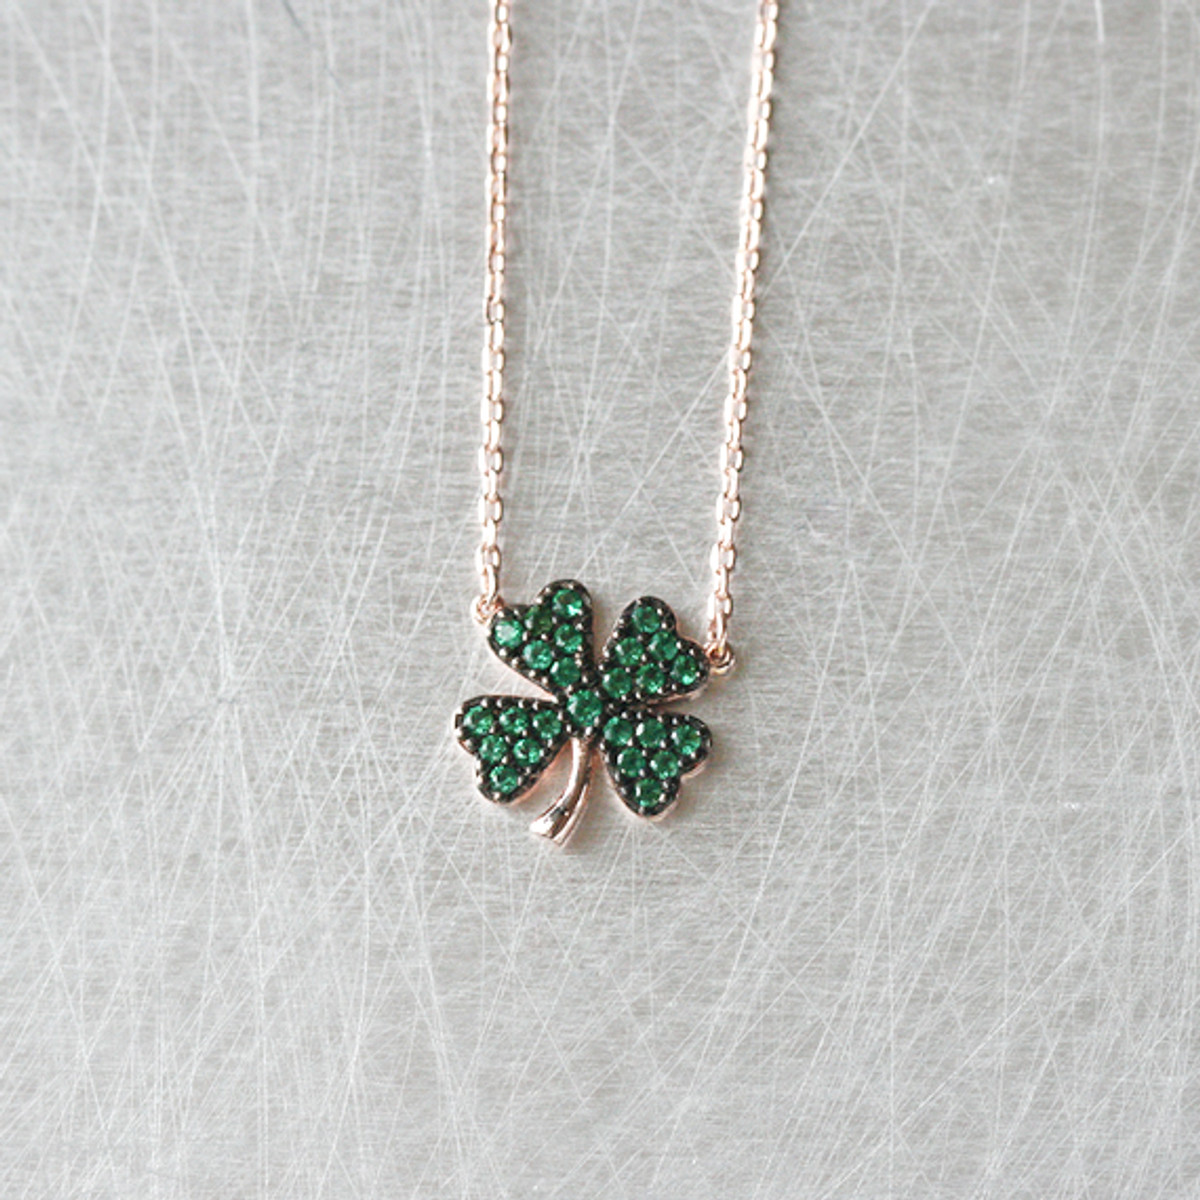 Four Leaf Clover Sterling Silver Necklace - Gold by Spero London